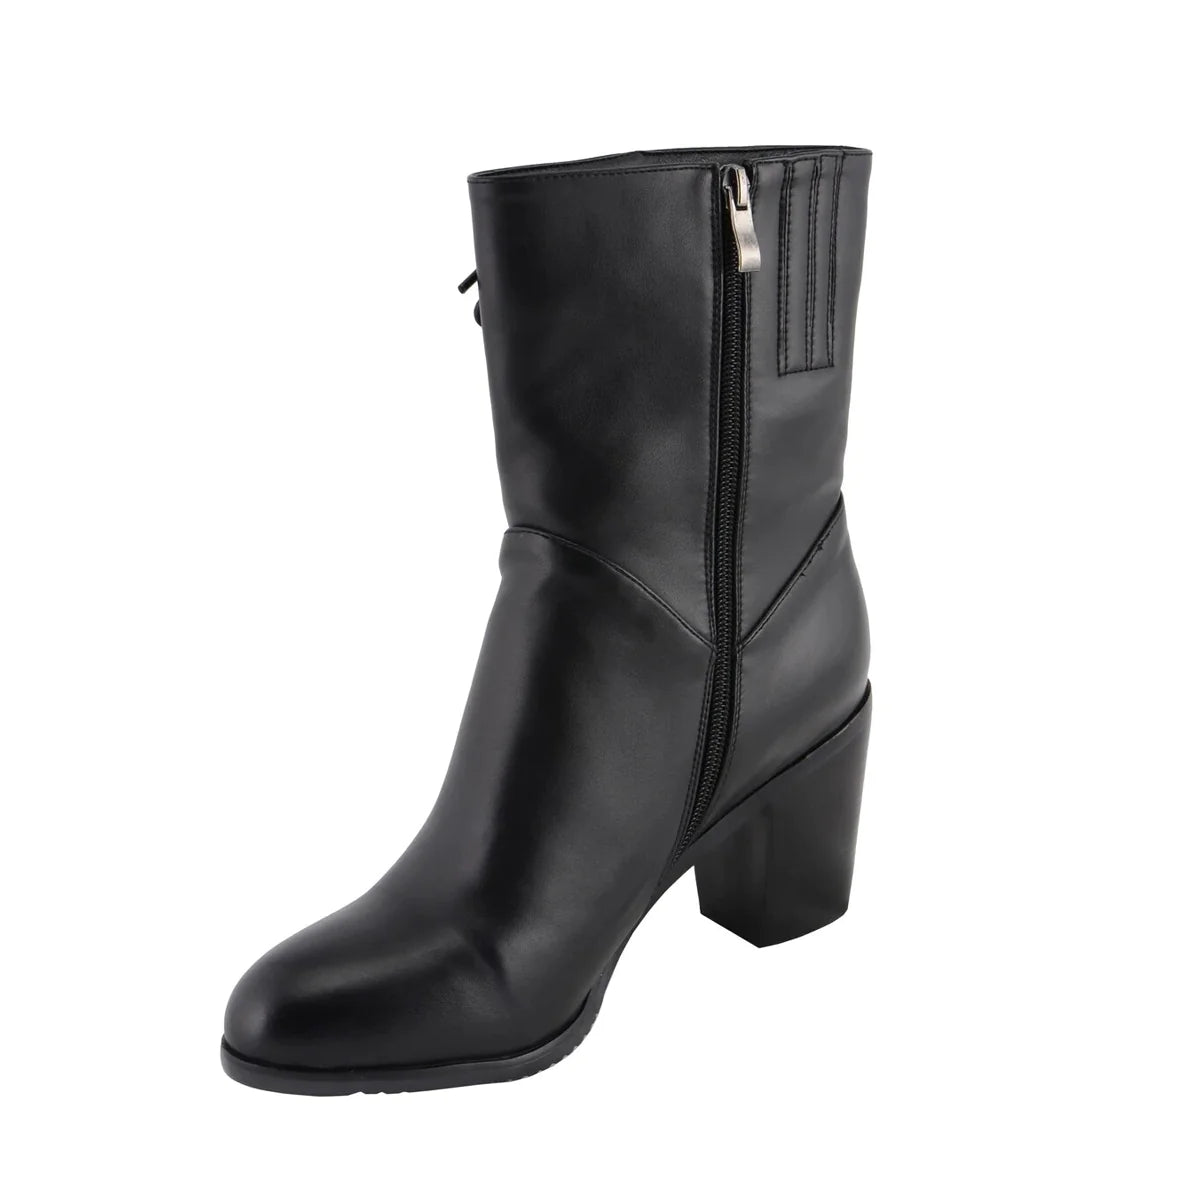 Womens Black Lace Side Riding Boots